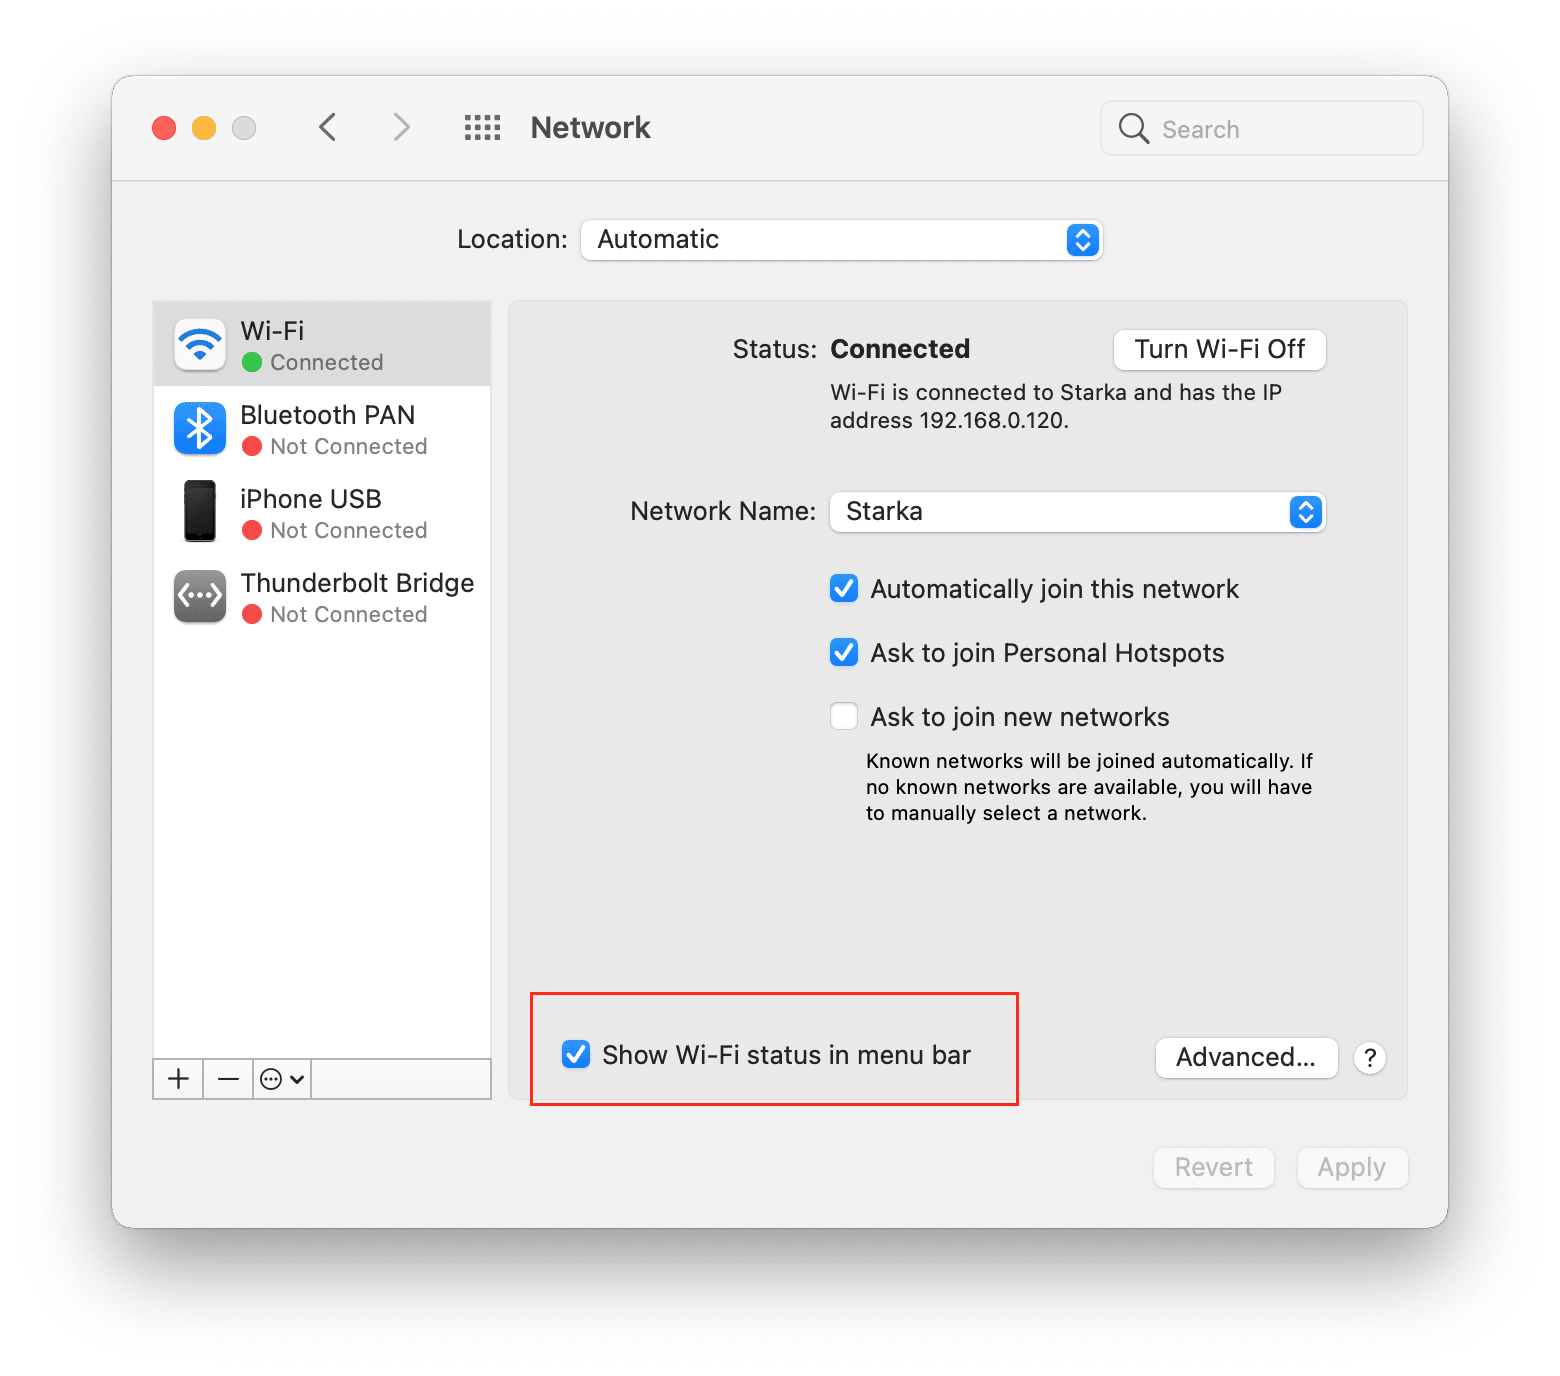 System preferences window showing how to enable displaying Wi-Fi status in menu bar